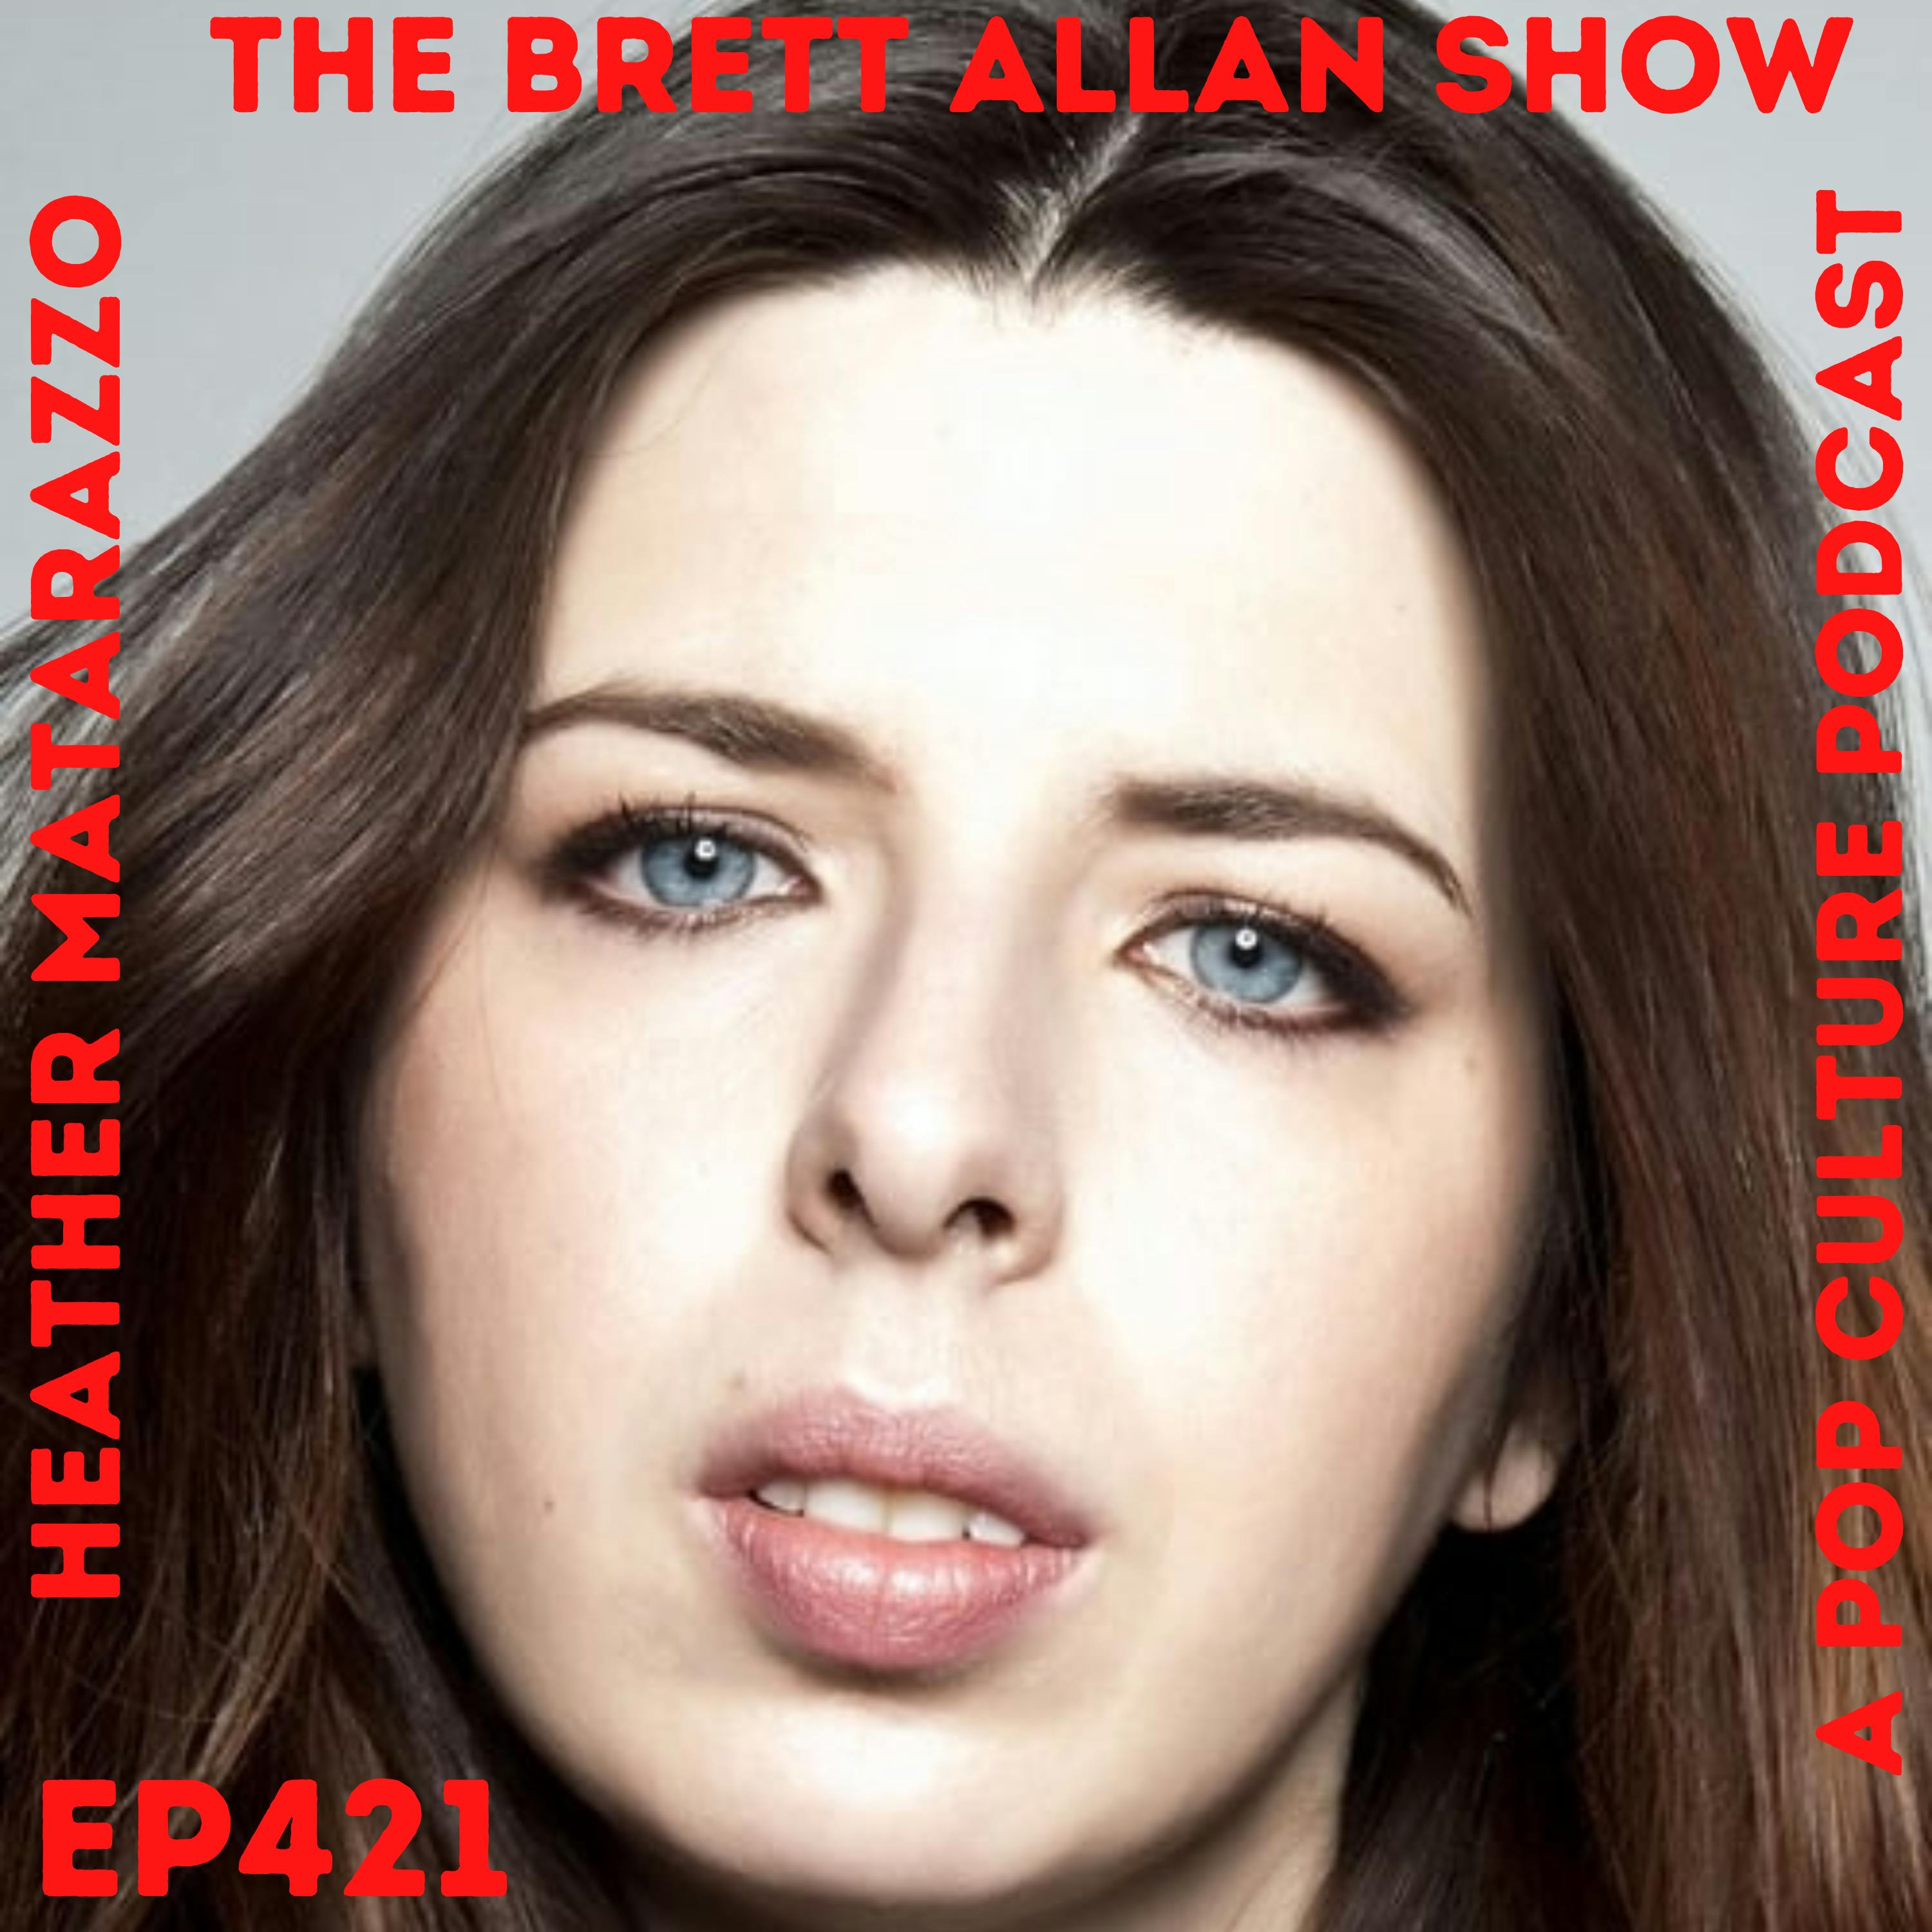 Heather Matarazzo Talks "Welcome to the Dollhouse" "Saved" "Scream" "Hostel" and Much More! Image